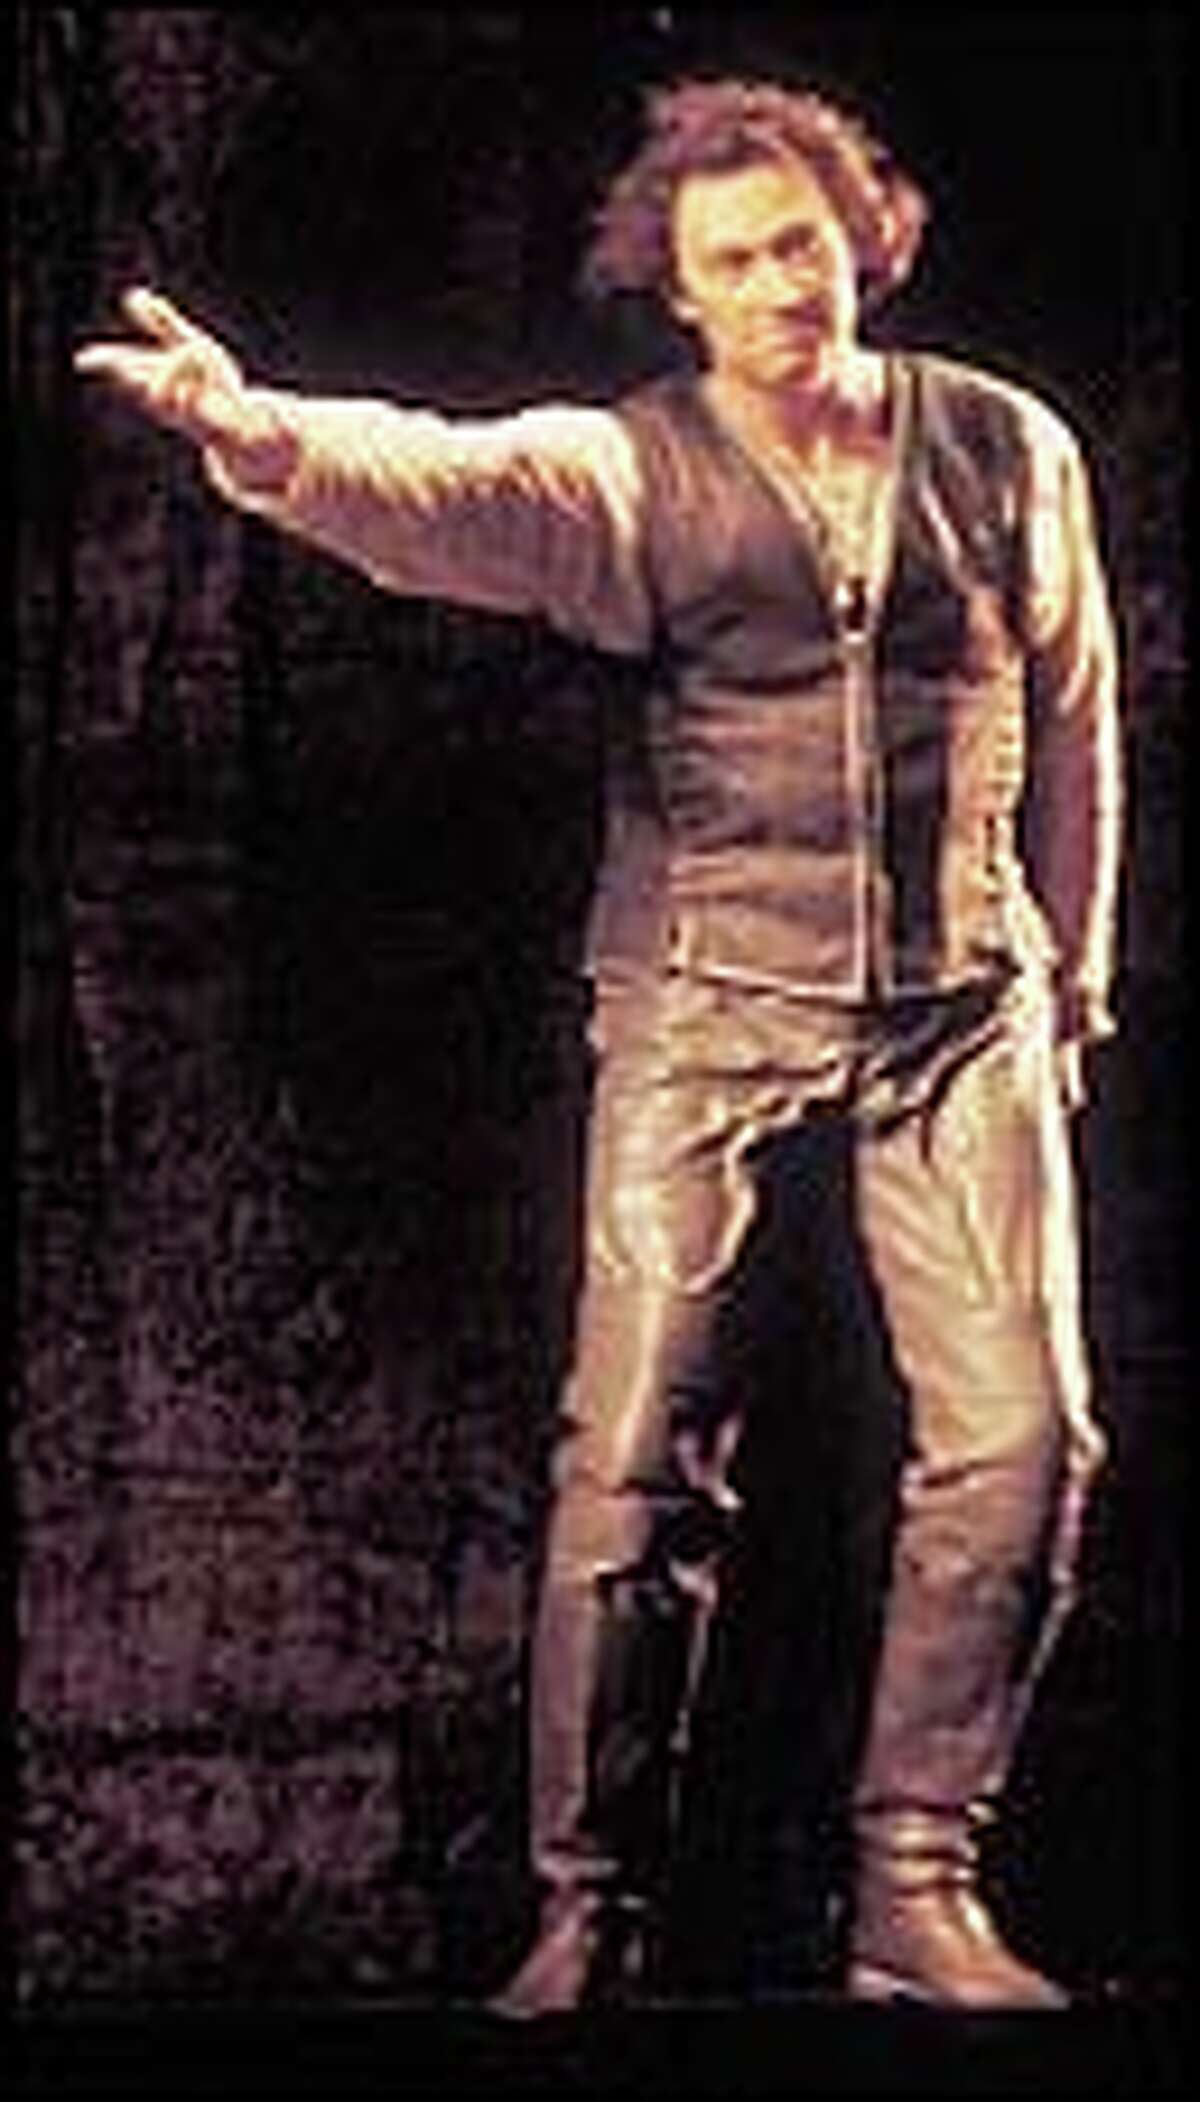 Richard Berkeley-Steele, above, has replaced the injured Alan Woodrow as Siegfried in the "Ring" cycle.